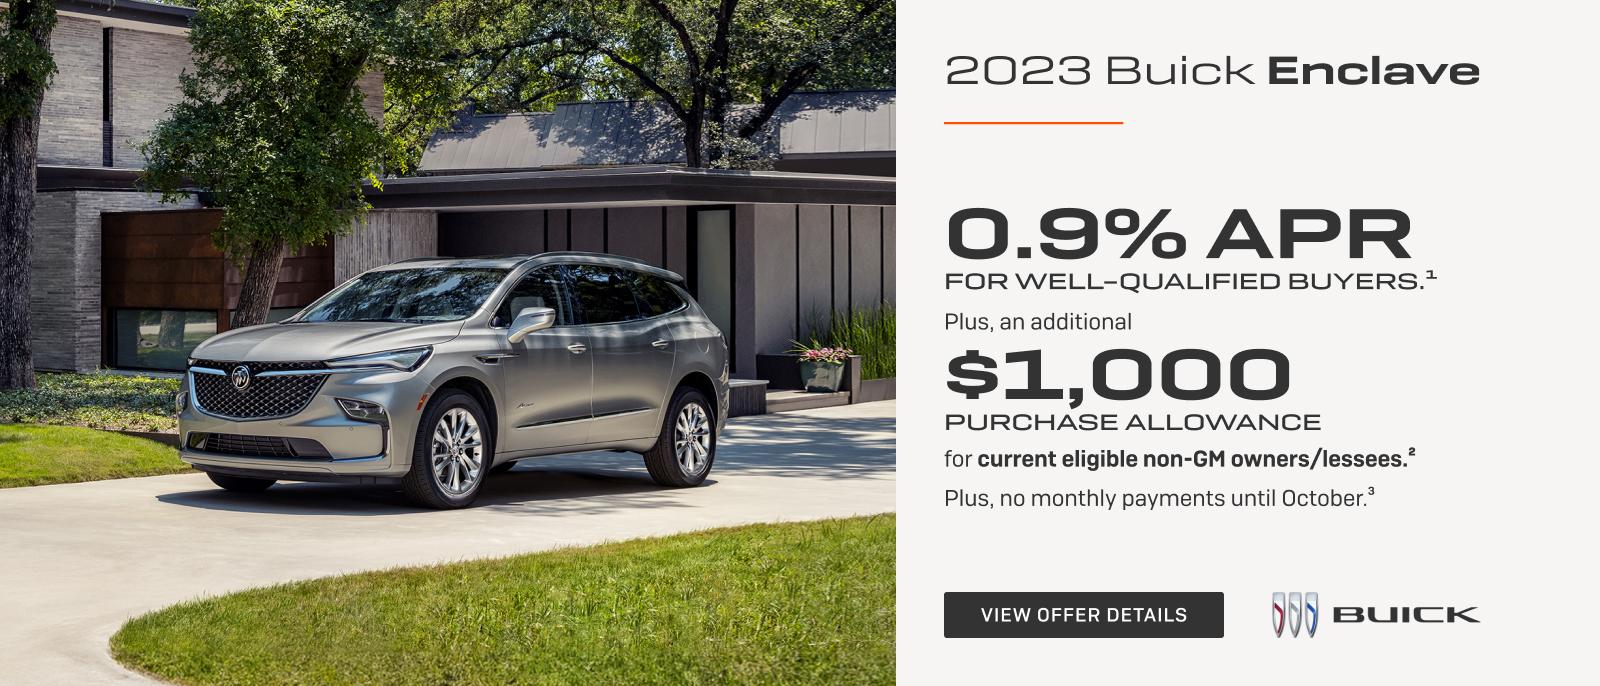 0.9% APR 
FOR WELL-QUALIFIED BUYERS.1

Plus, an additional $1,000 PURCHASE ALLOWANCE for current eligible non-GM owners/lessees.2

Plus, no monthly payments until October. 3